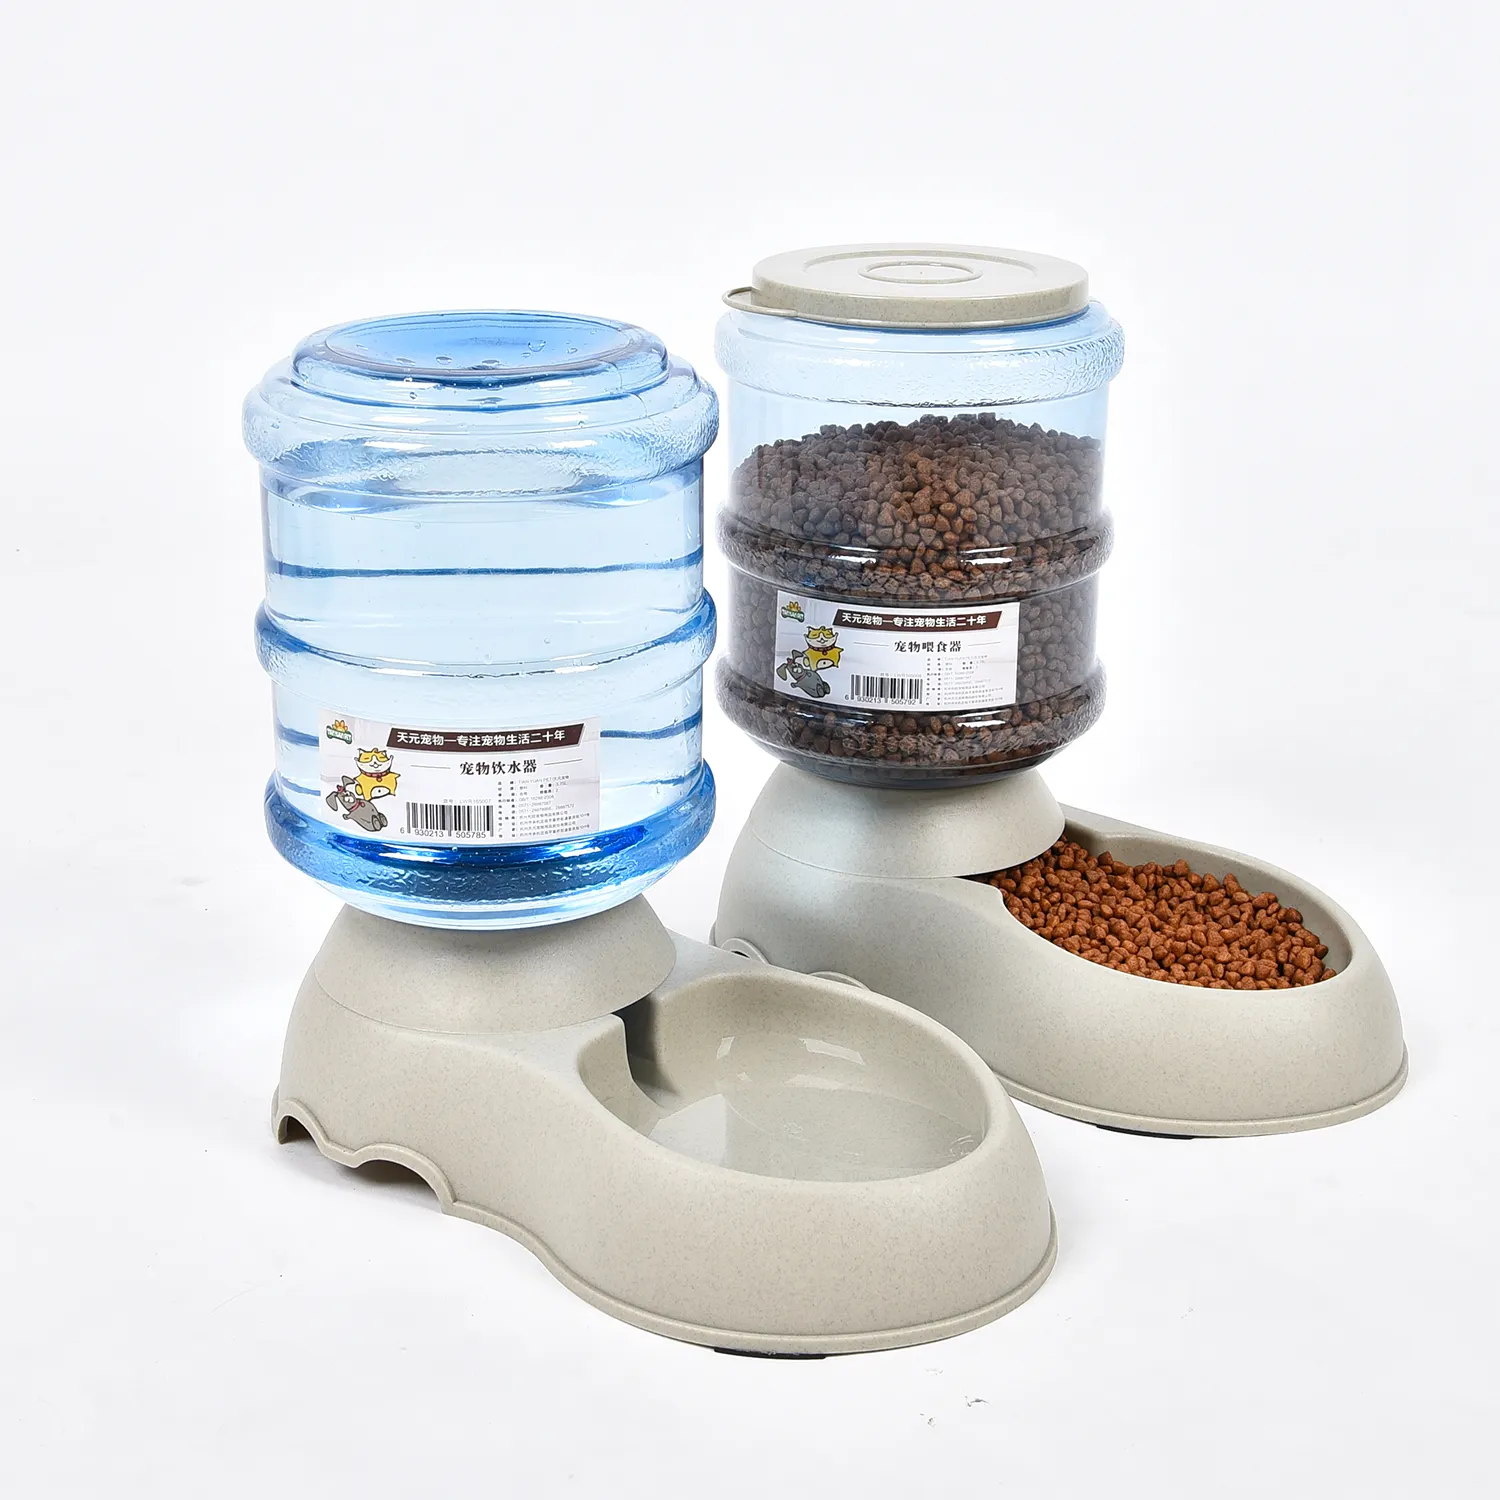 Automatic Pet Feeder、Smart Pet Water Feeder、Food Automatic Dog Feeder